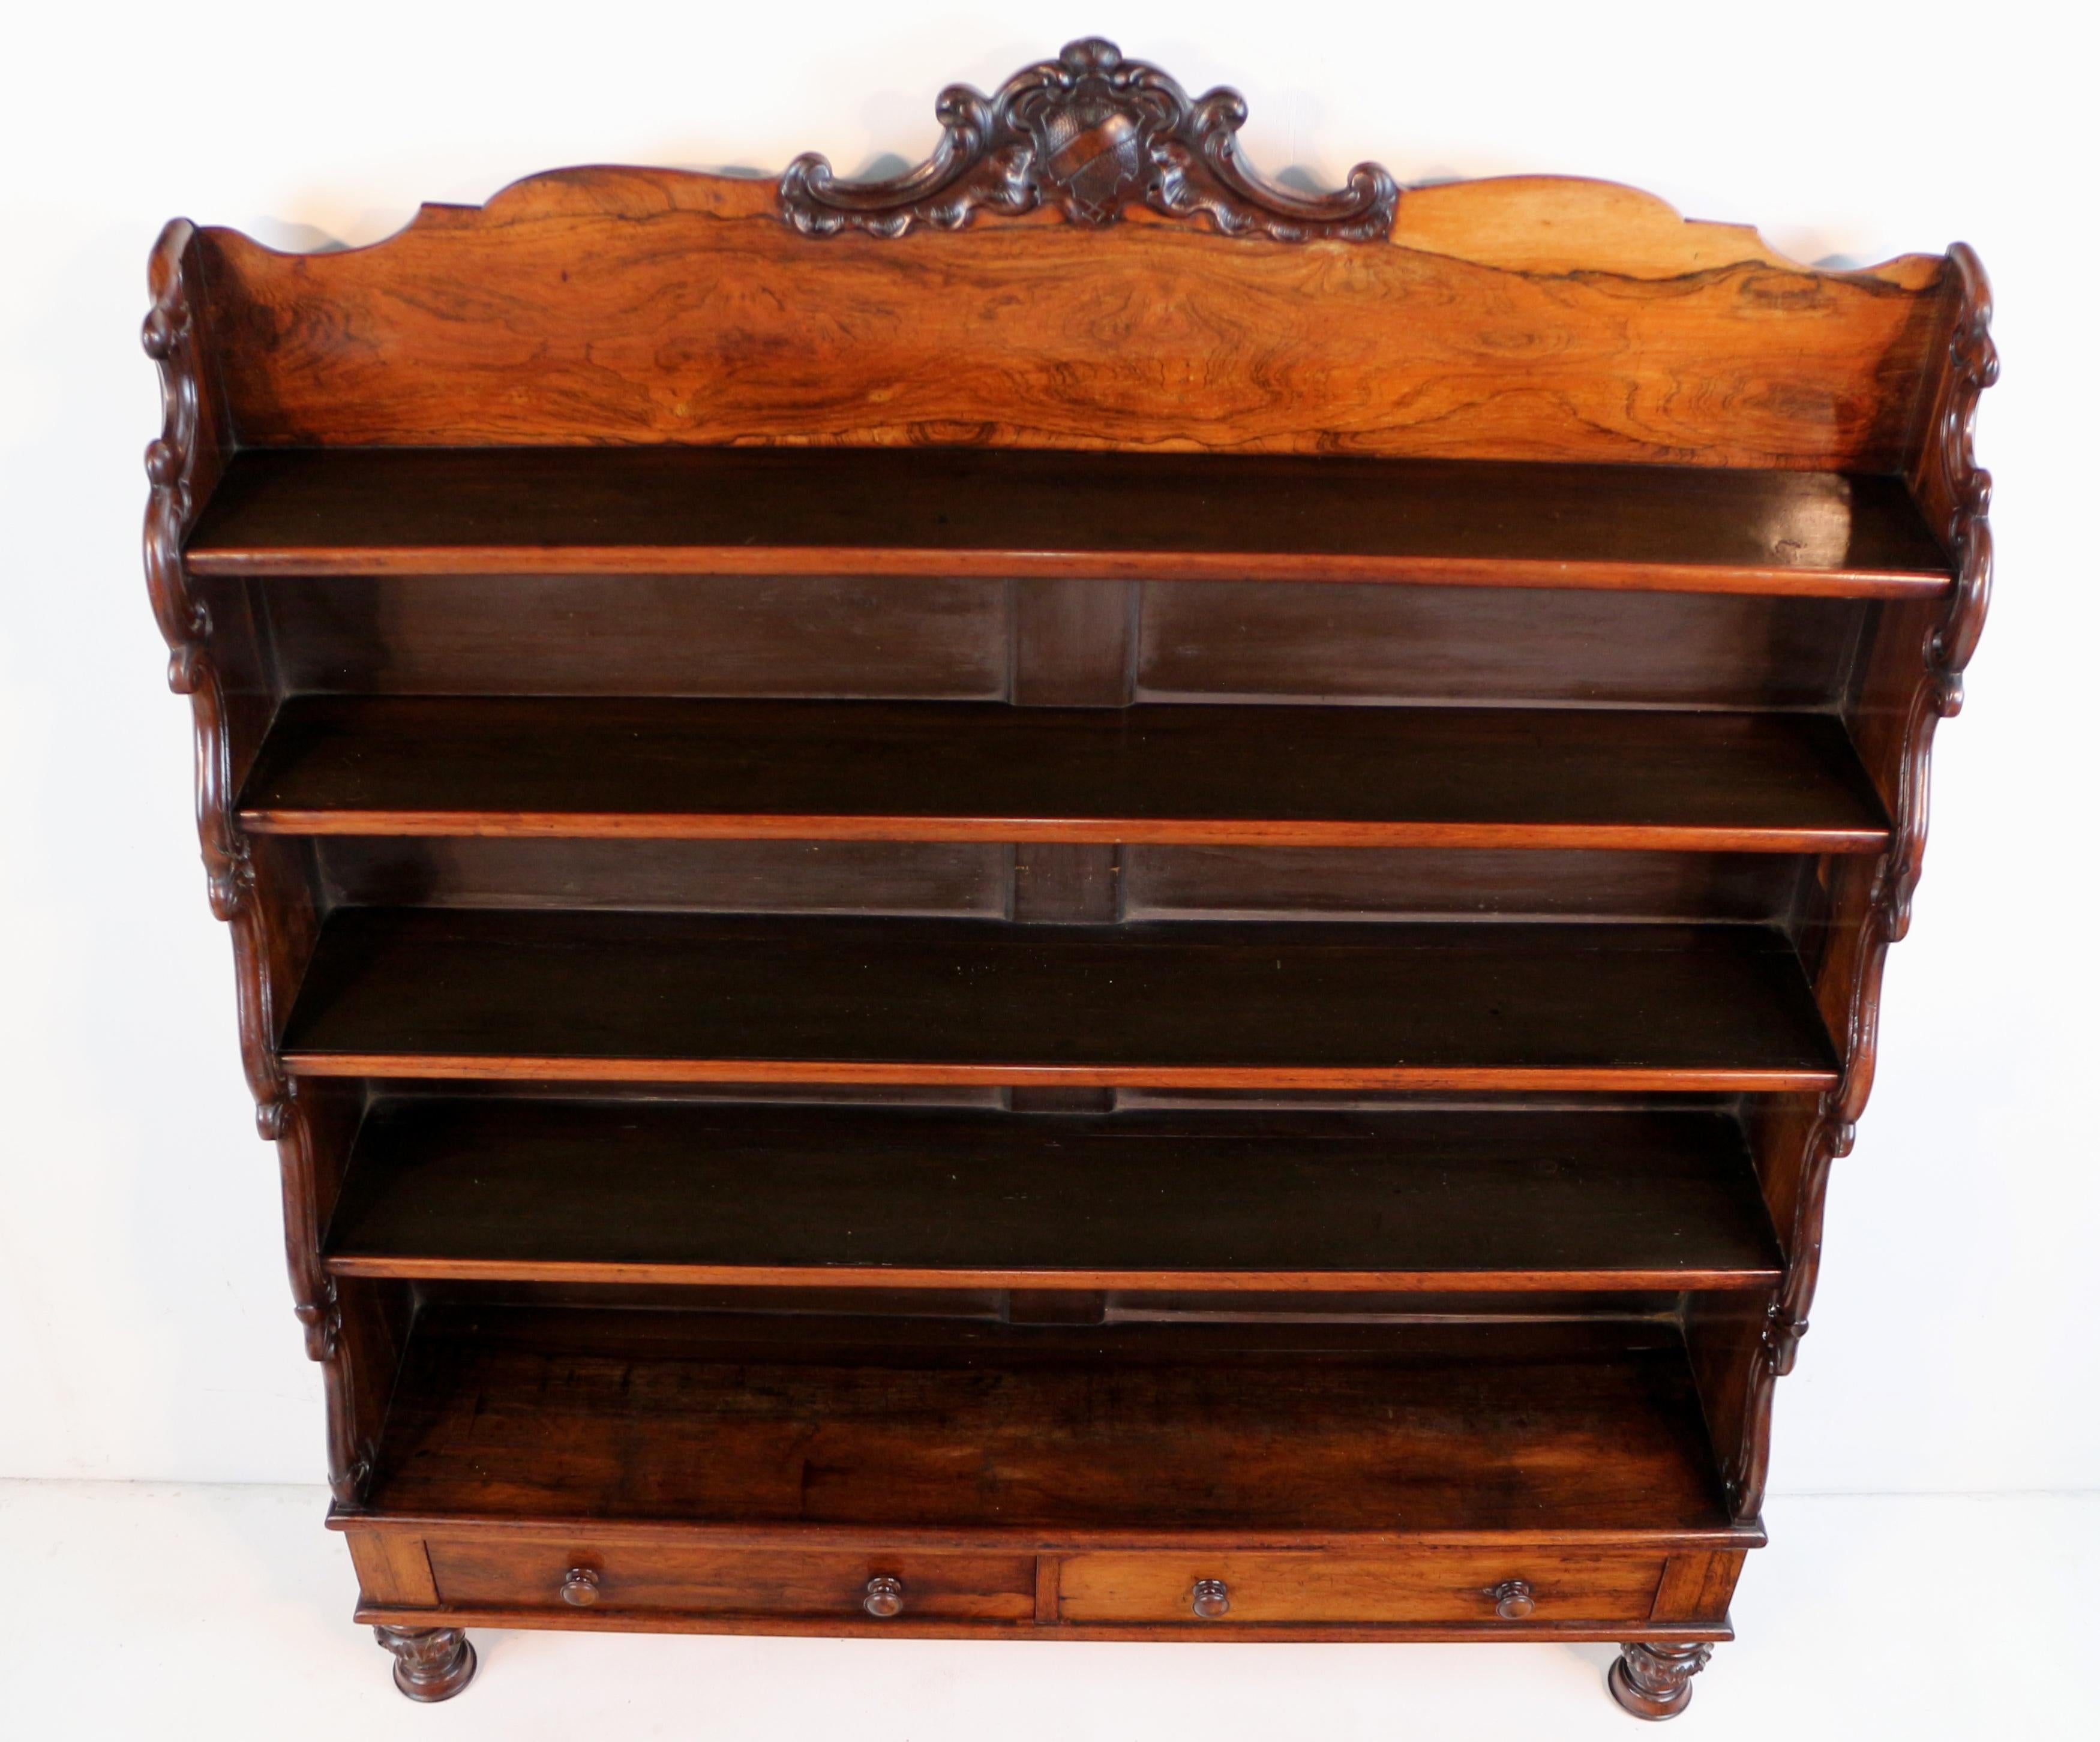 Antique English Regency Rosewood Waterfall Bookcase with Drawers For Sale 15